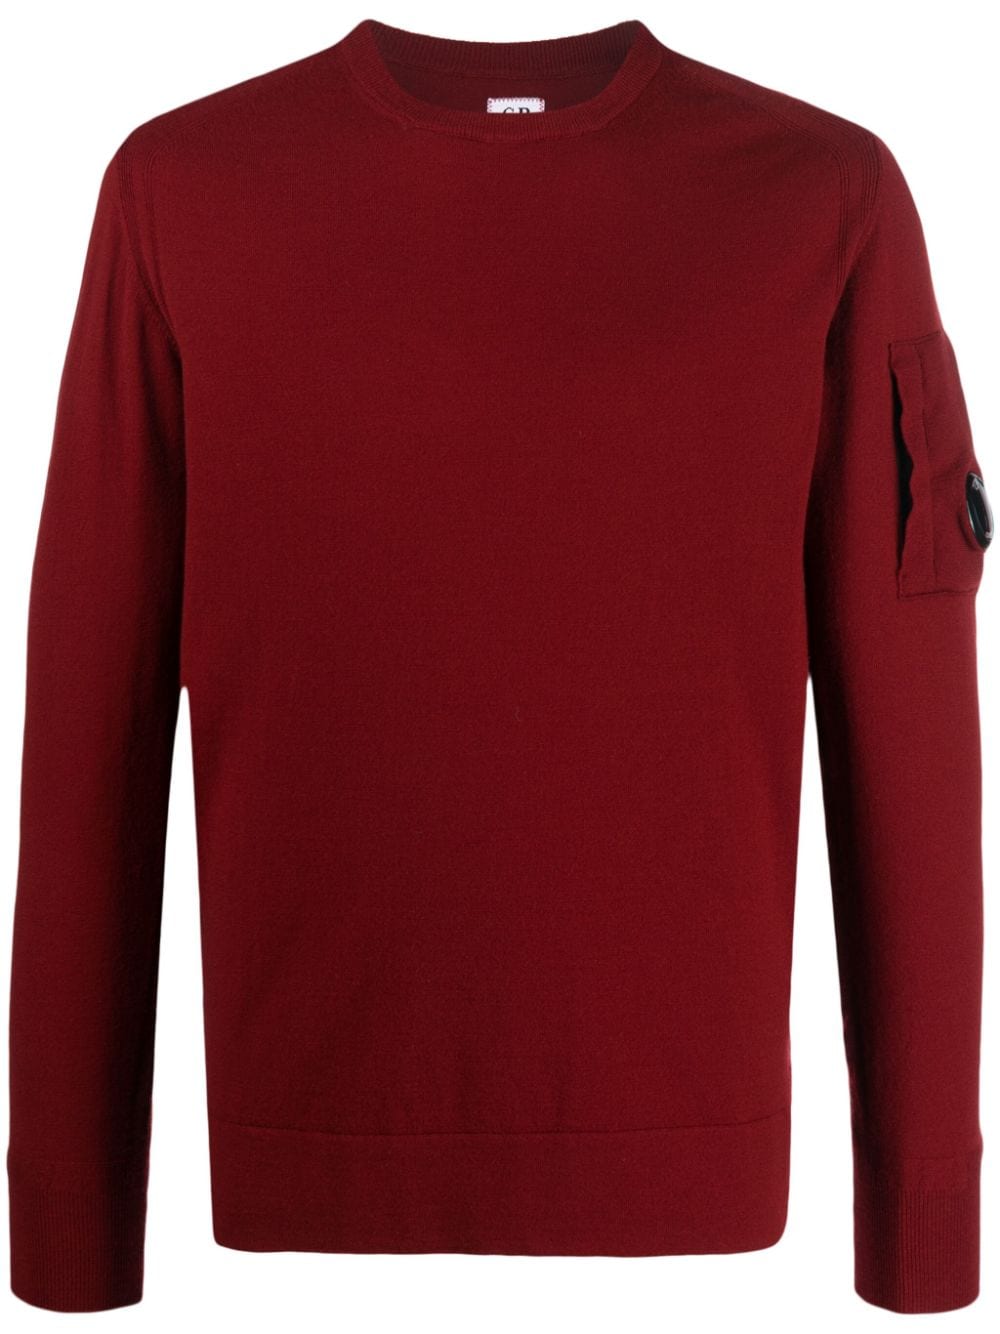 C.P. Company Lens-detail knitted jumper - Red von C.P. Company